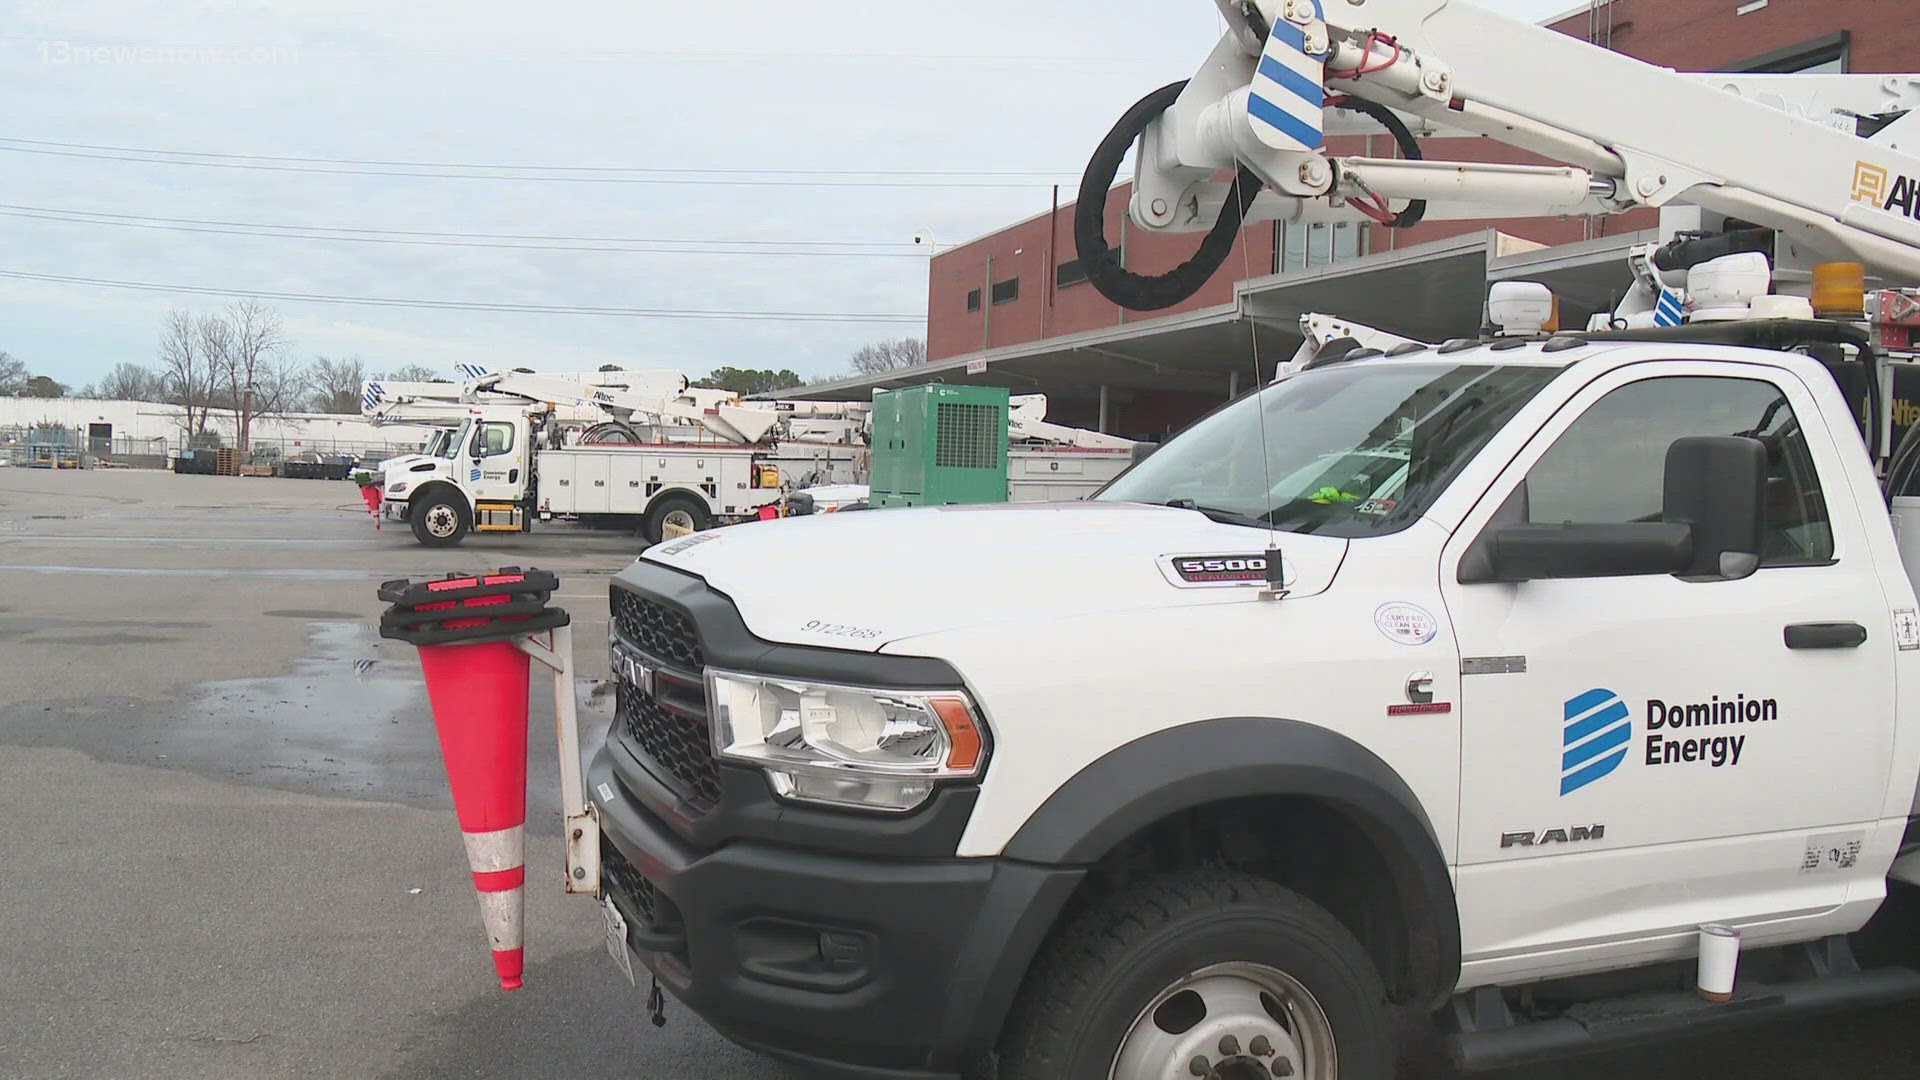 With the start of hurricane season this Saturday, Dominion Energy is gearing up to combat possible outages.